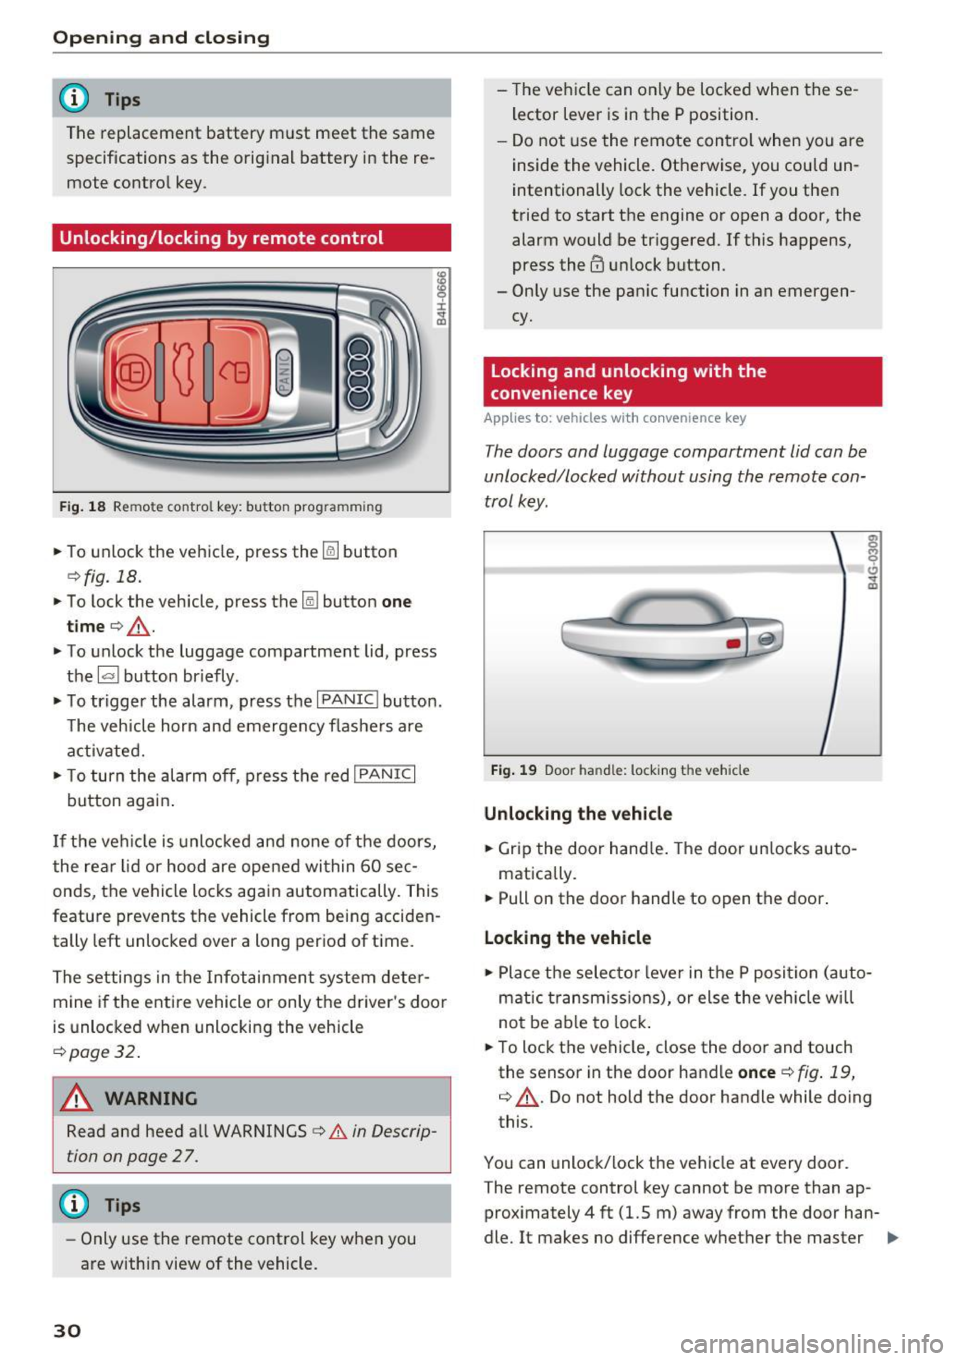 AUDI A6 2017 Owners Guide Opening  and clo sin g 
@ Tips 
The  replacement  battery  must  meet  the  same 
specifications  as  the  orig inal  battery  in the  re­
mote  control  key. 
Unlocking/locking  by remote  control 
